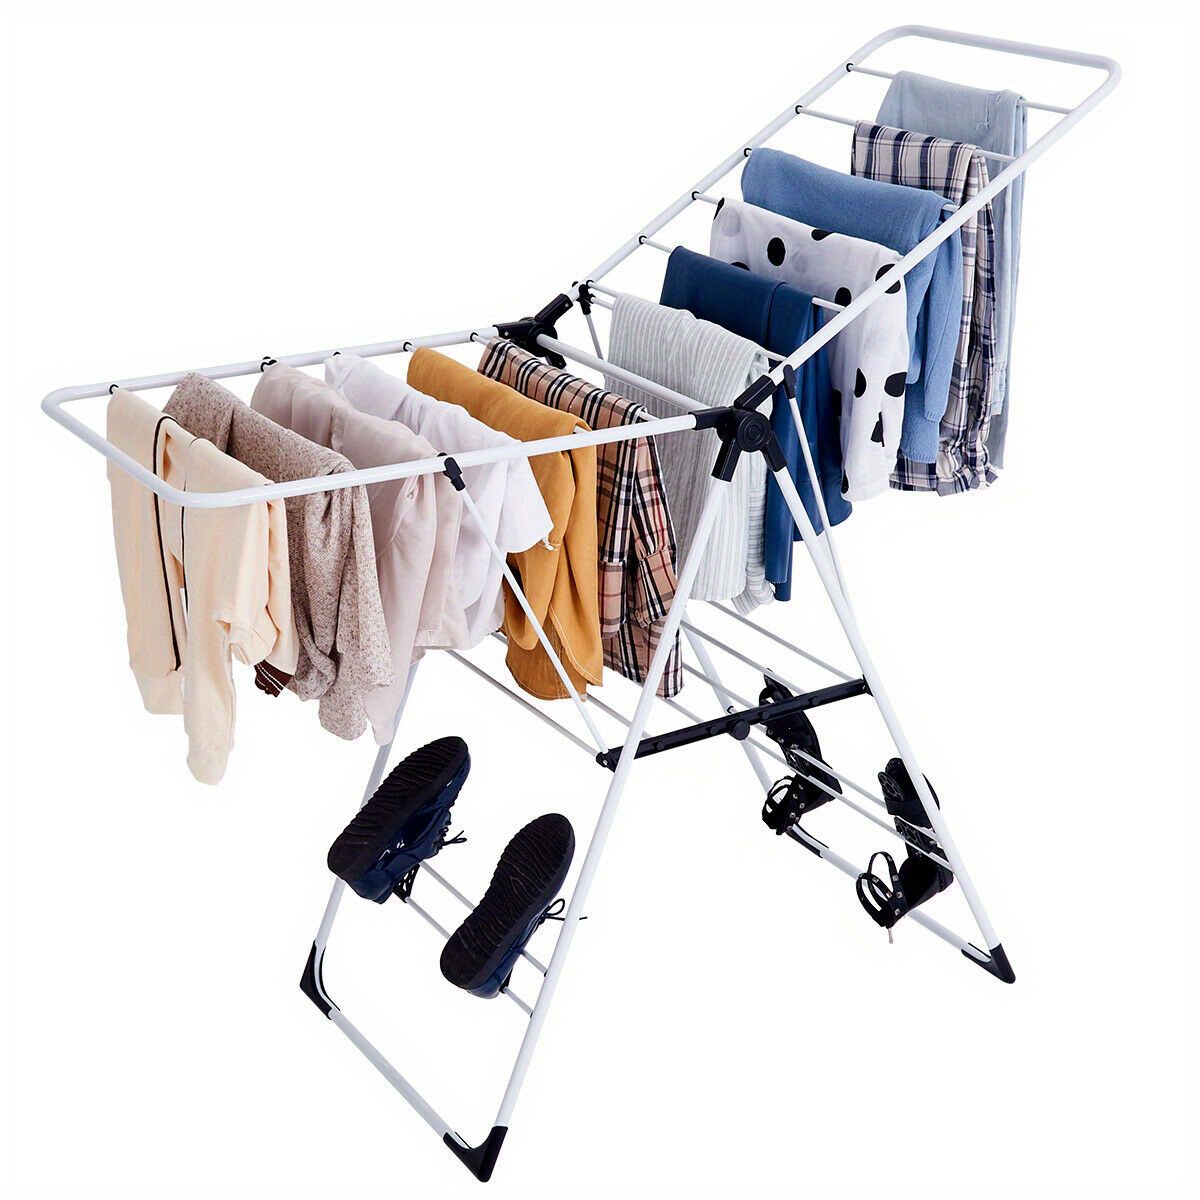 

Lifezeal Laundry Clothes Storage Drying Rack Portable Folding Dryer Hanger Heavy Duty New